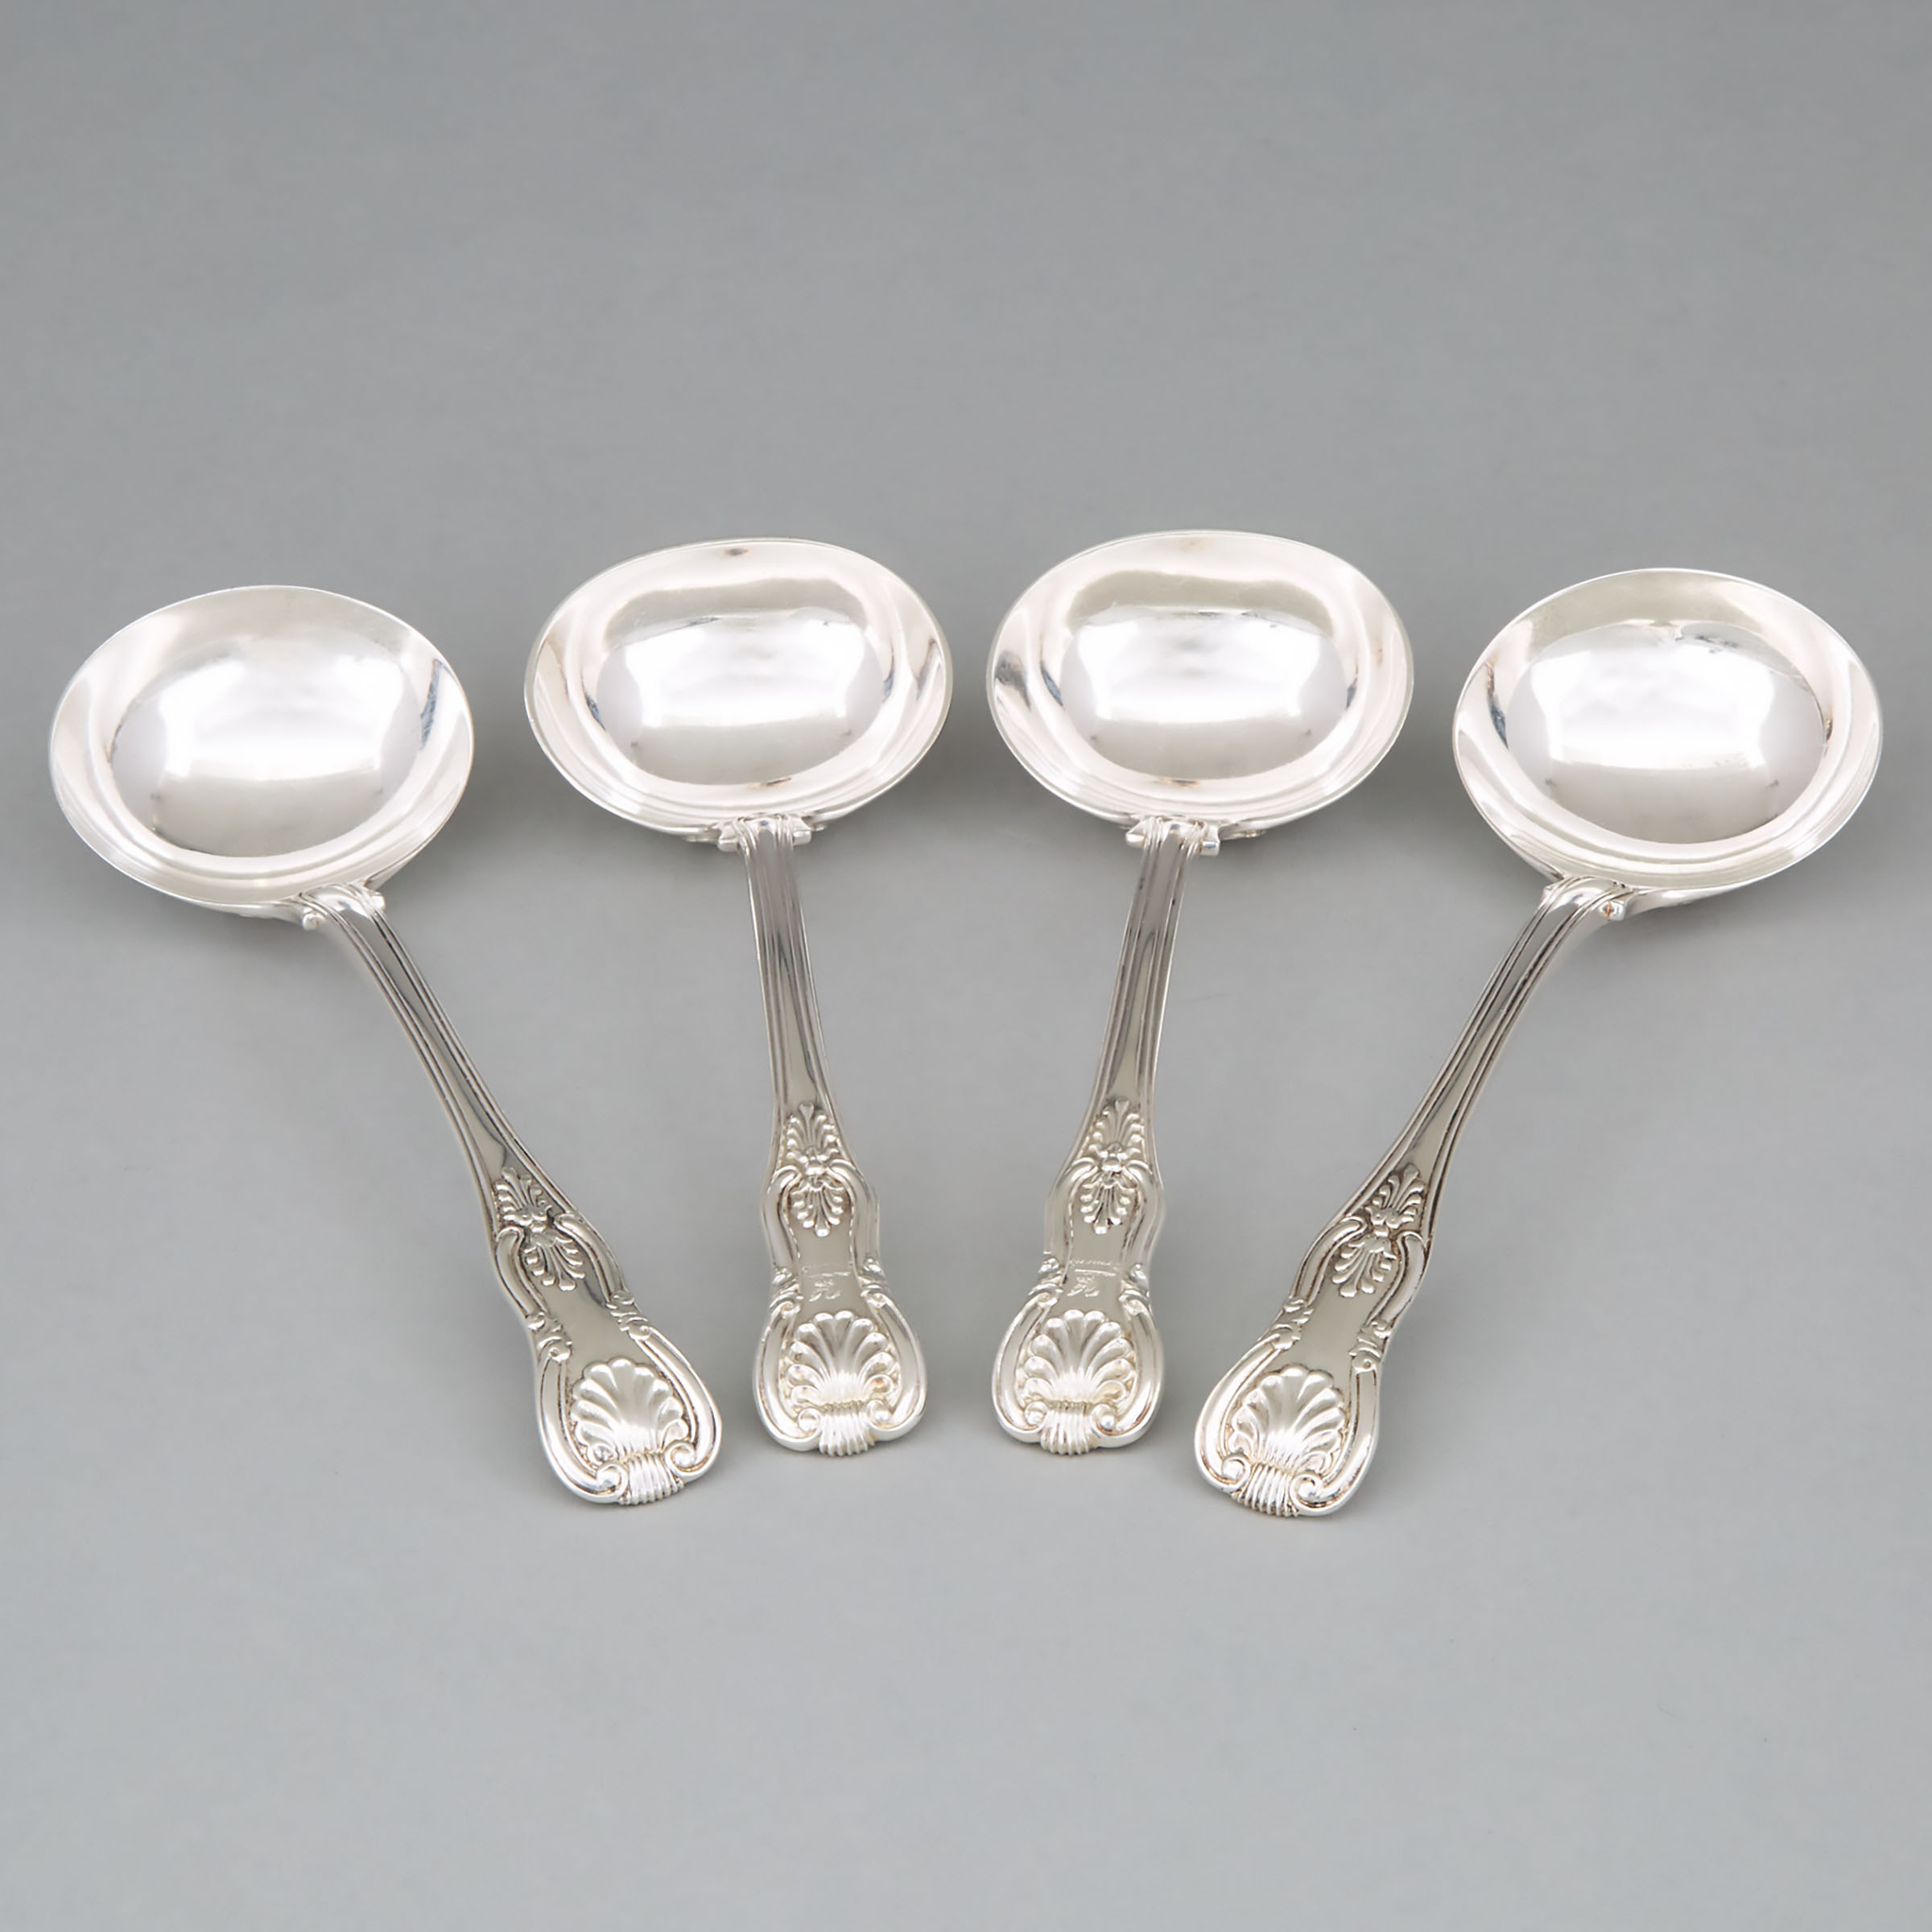 Two Pairs of William IV/Victorian Silver Kings Pattern Gravy Ladles, William Eaton and Mary Chawner, London, 1830/38